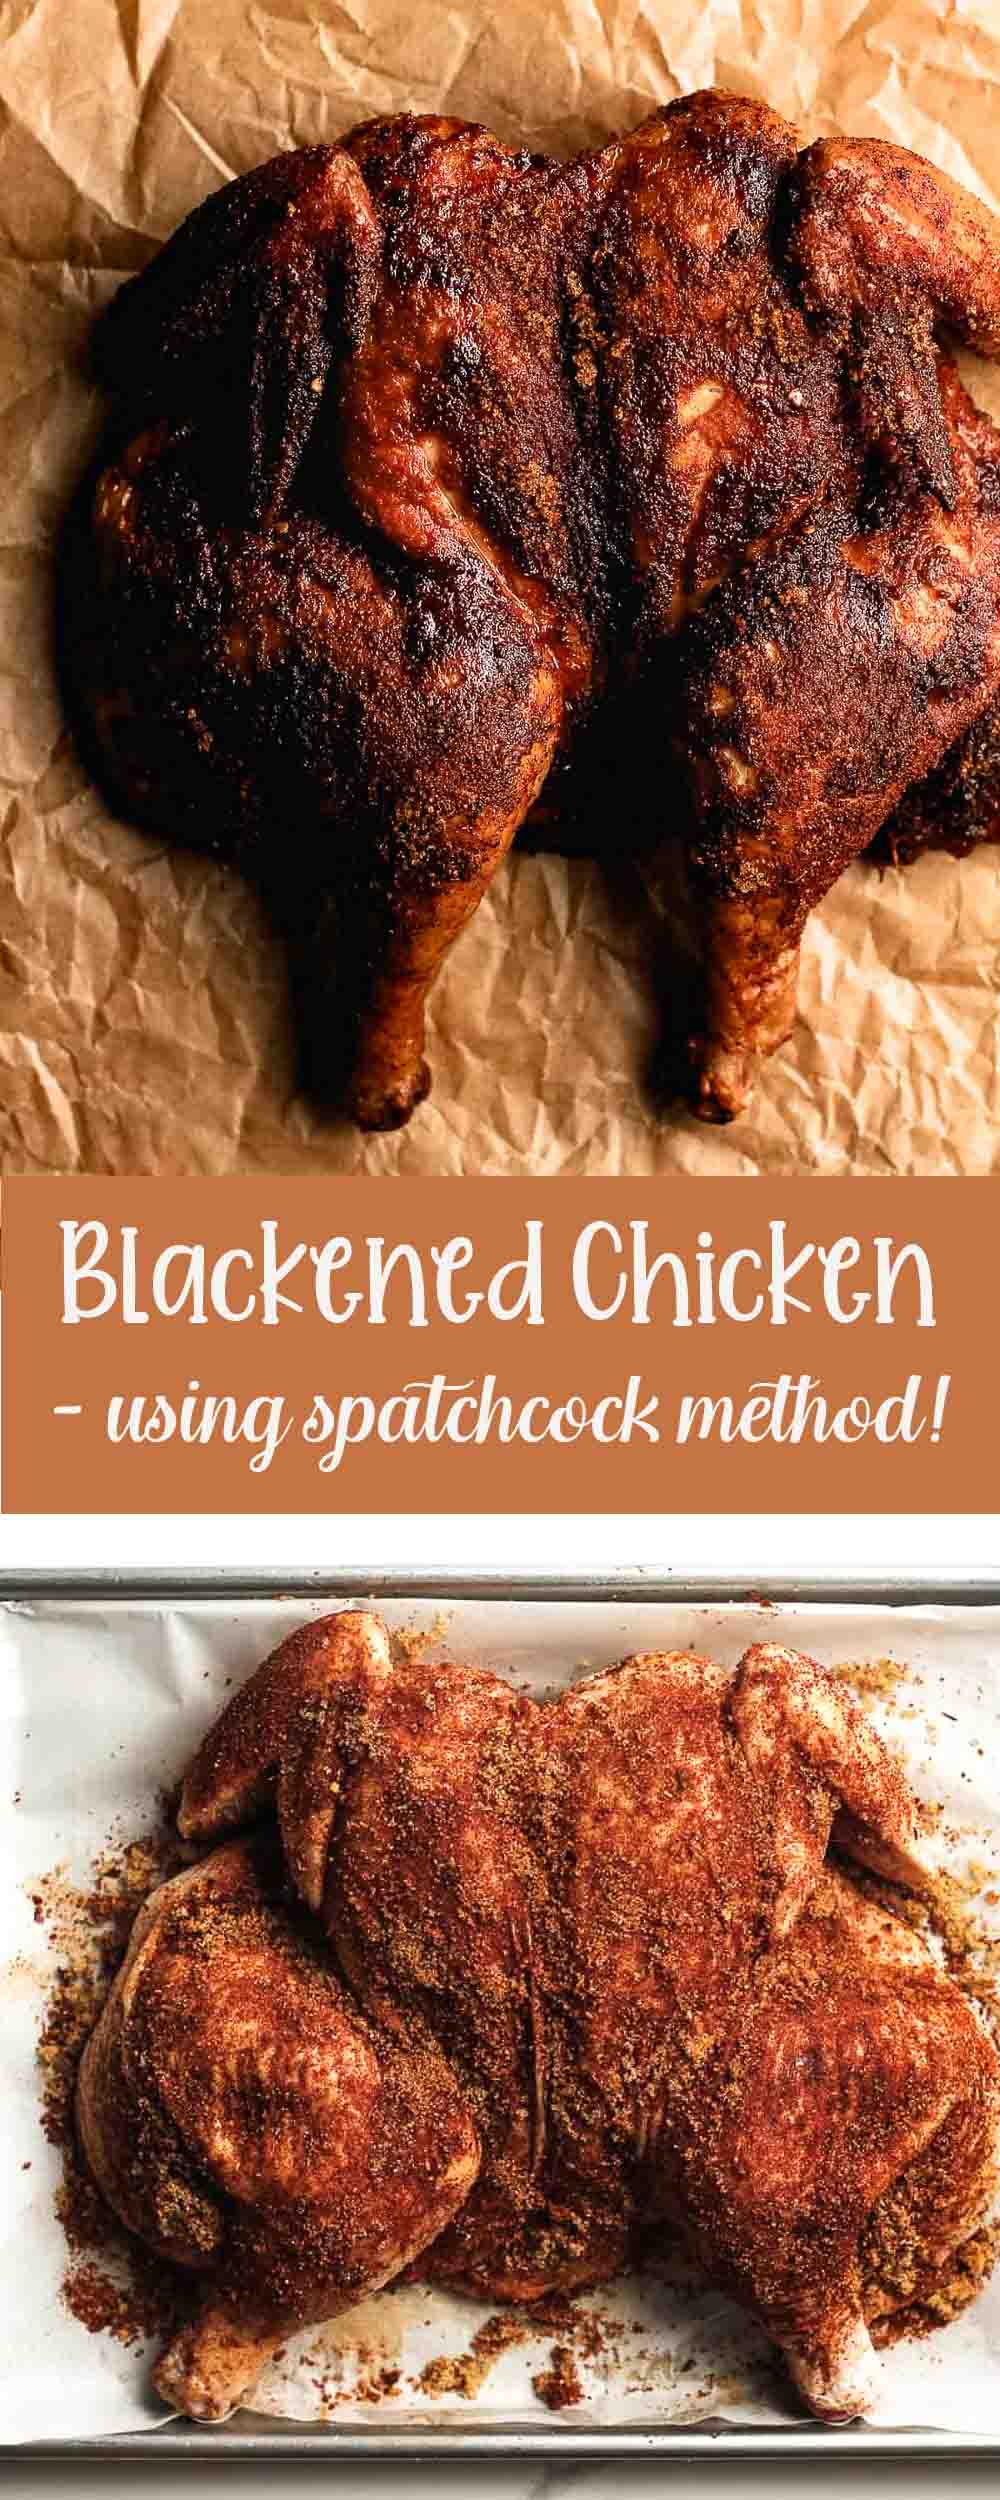 Two photos of Blackened Chicken with the spatchcock method.